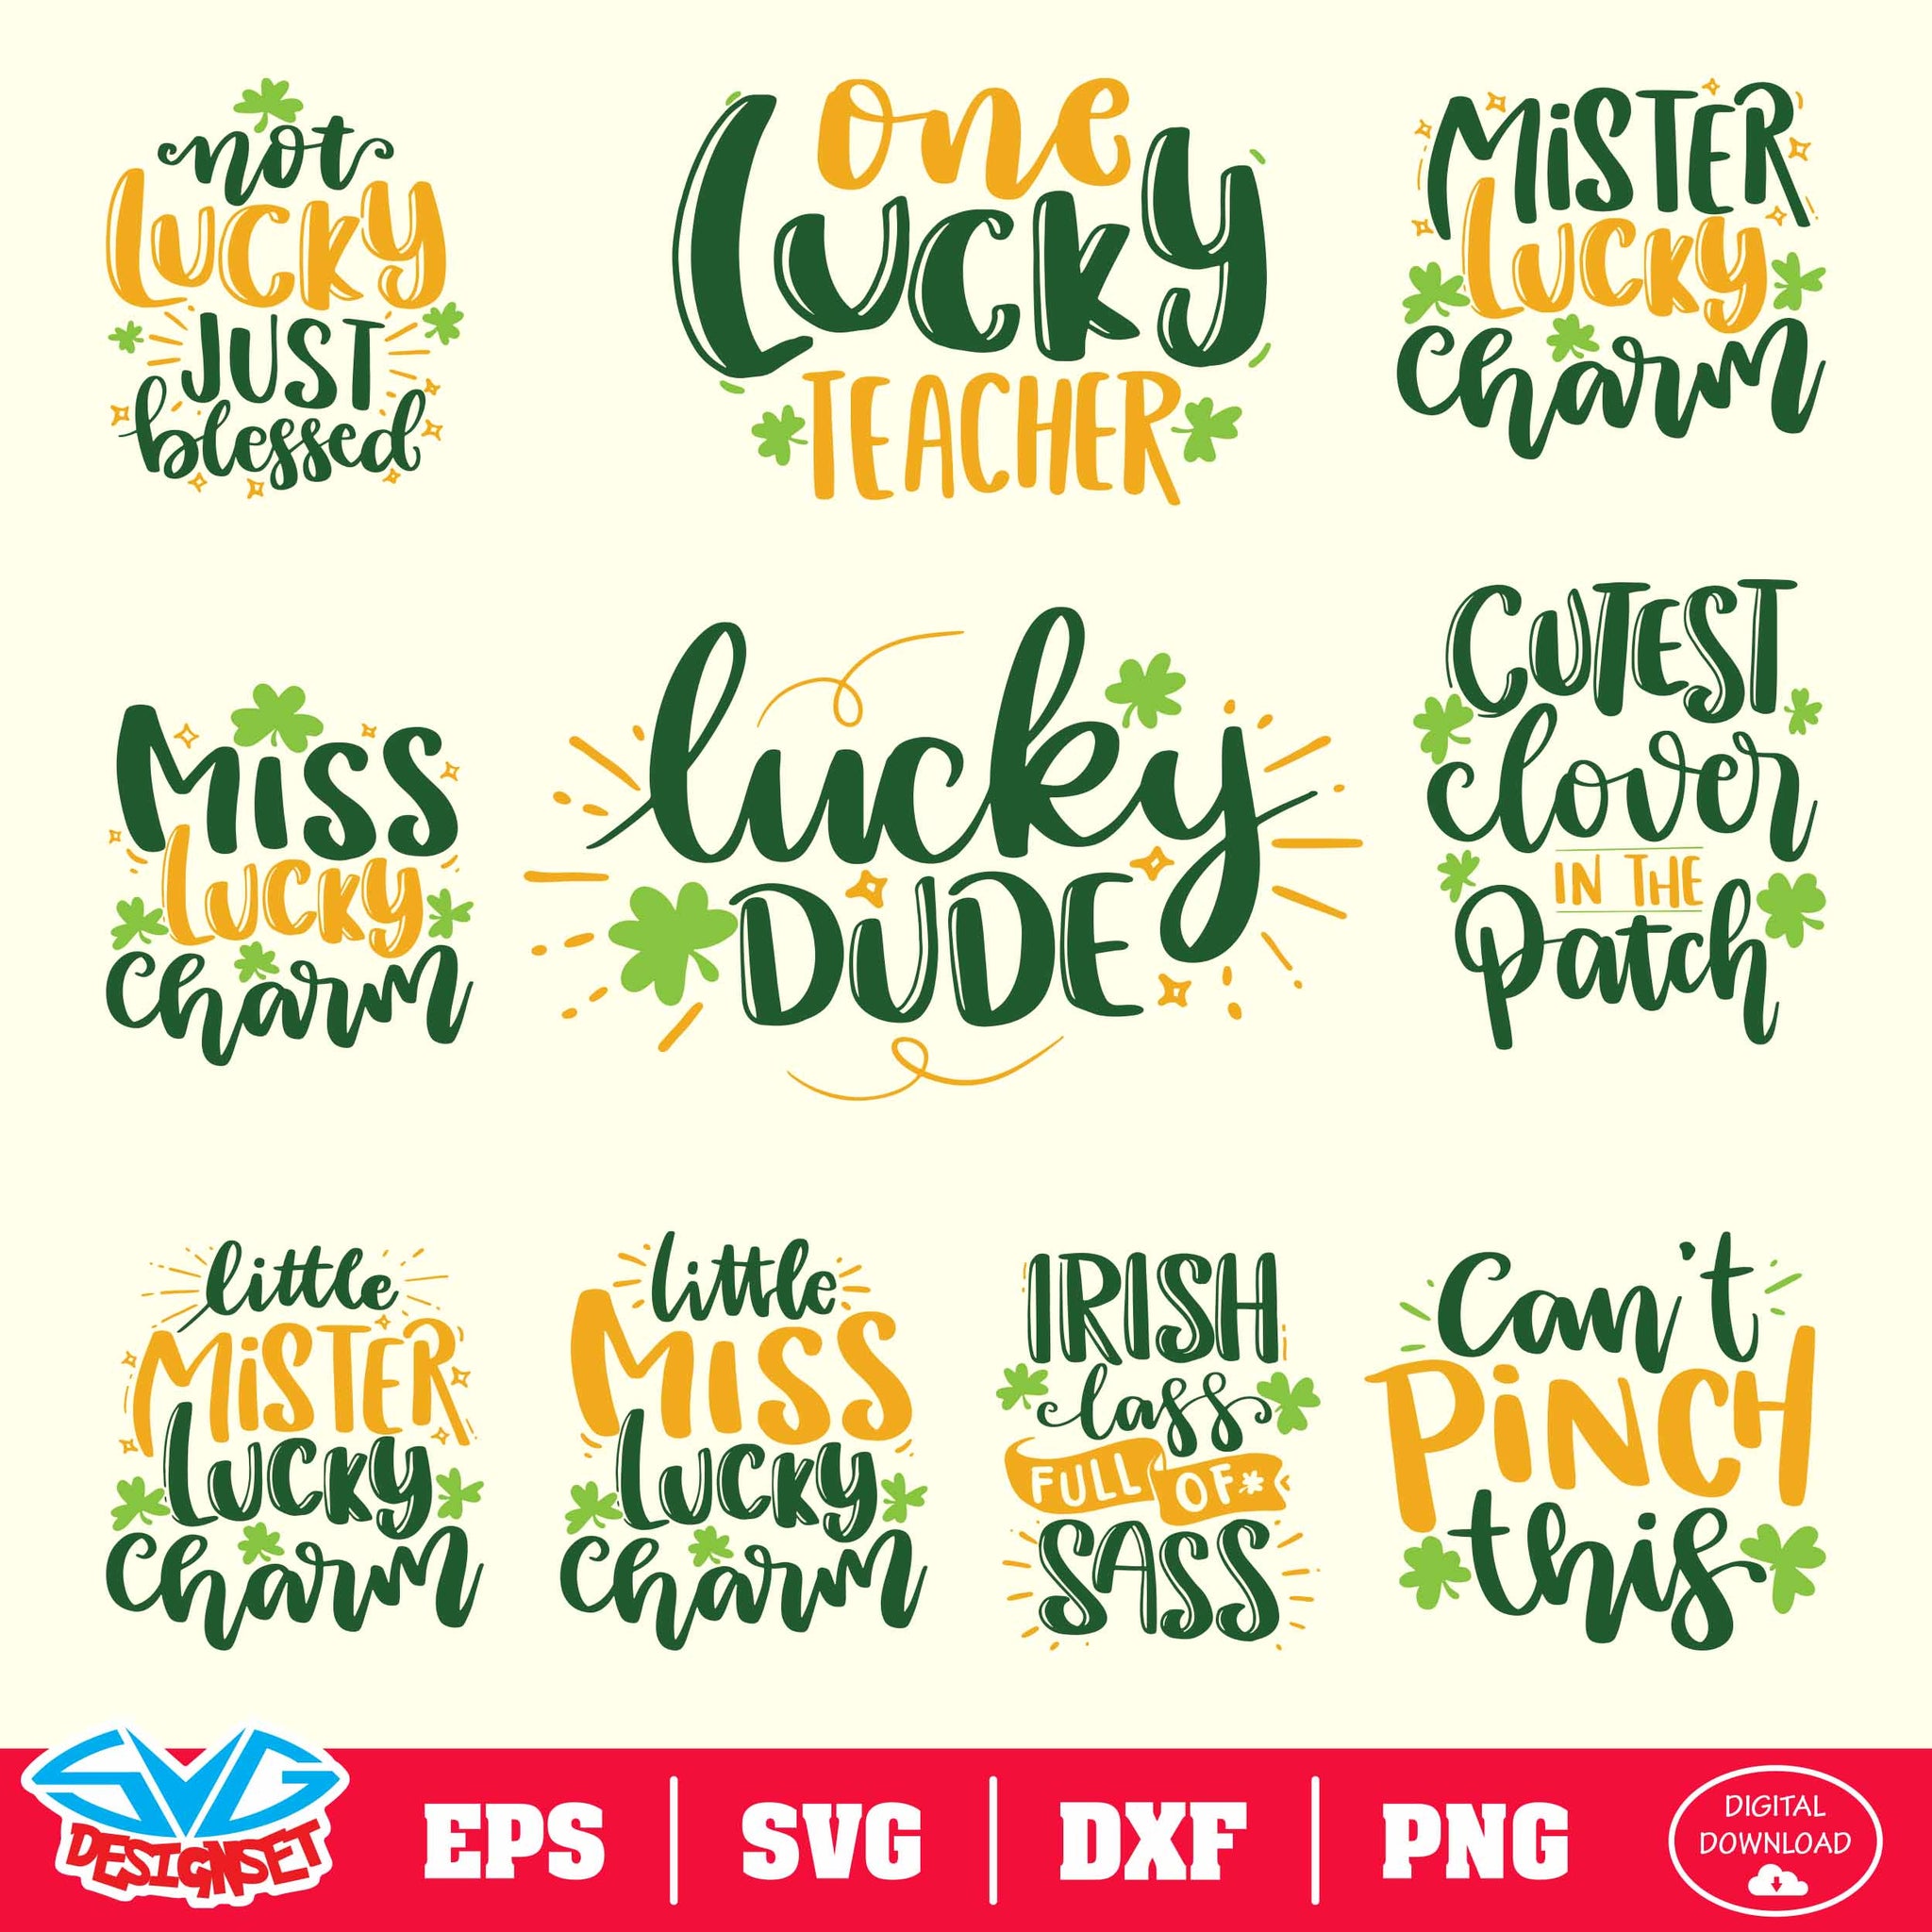 St. Patrick's Day Bundle Svg, Dxf, Eps, Png, Clipart, Silhouette and Cutfiles #001 - SVGDesignSets